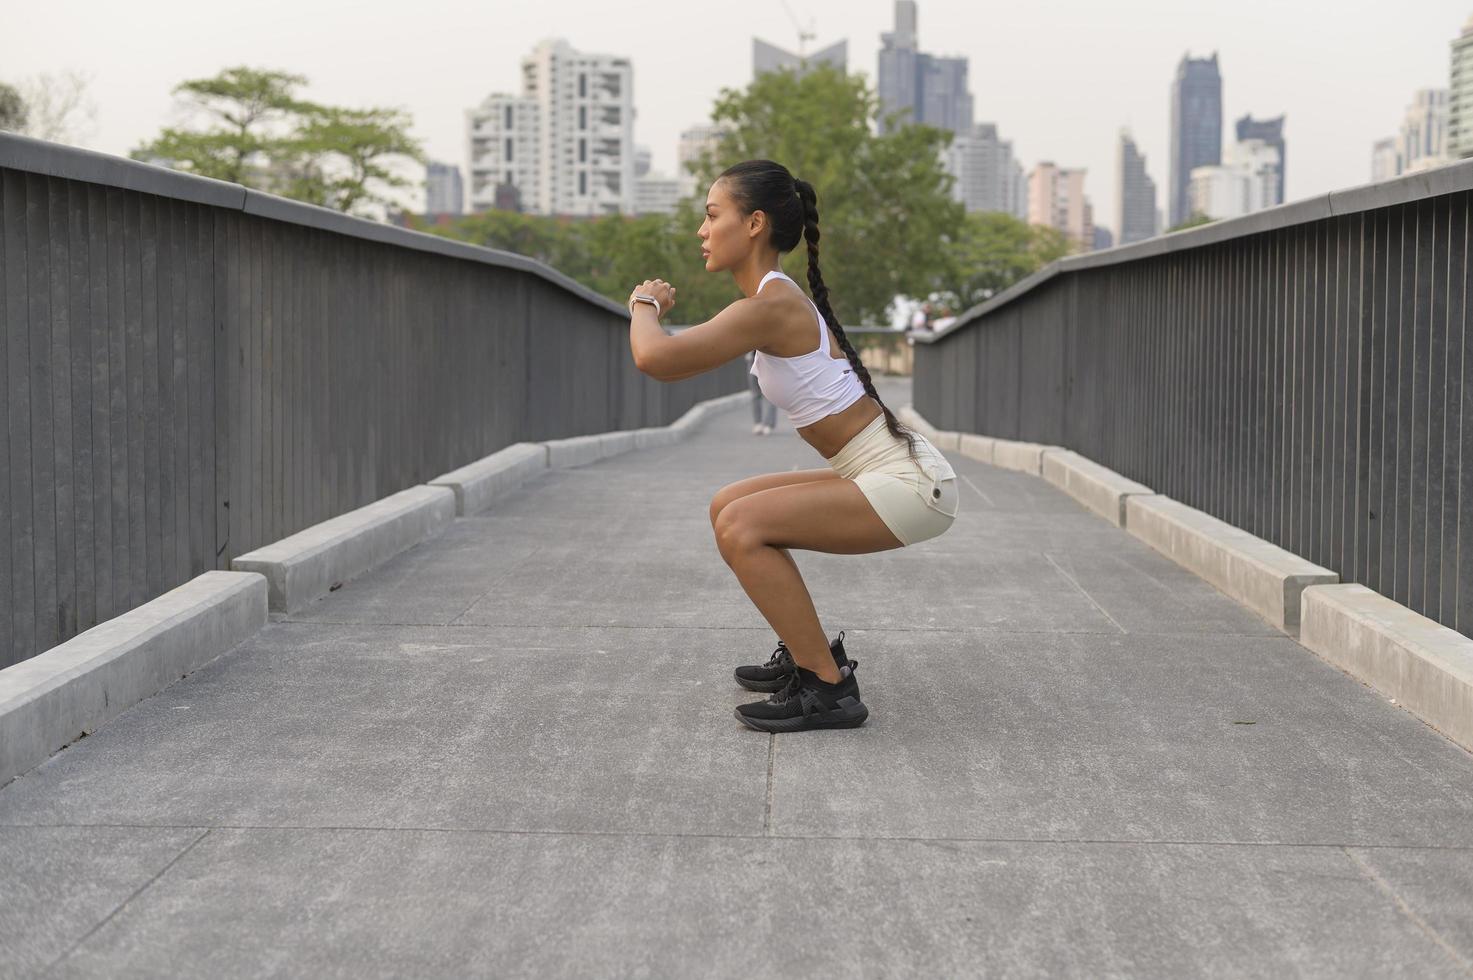 A young fitness woman in sportswear exercising in city park, Healthy and Lifestyles. photo